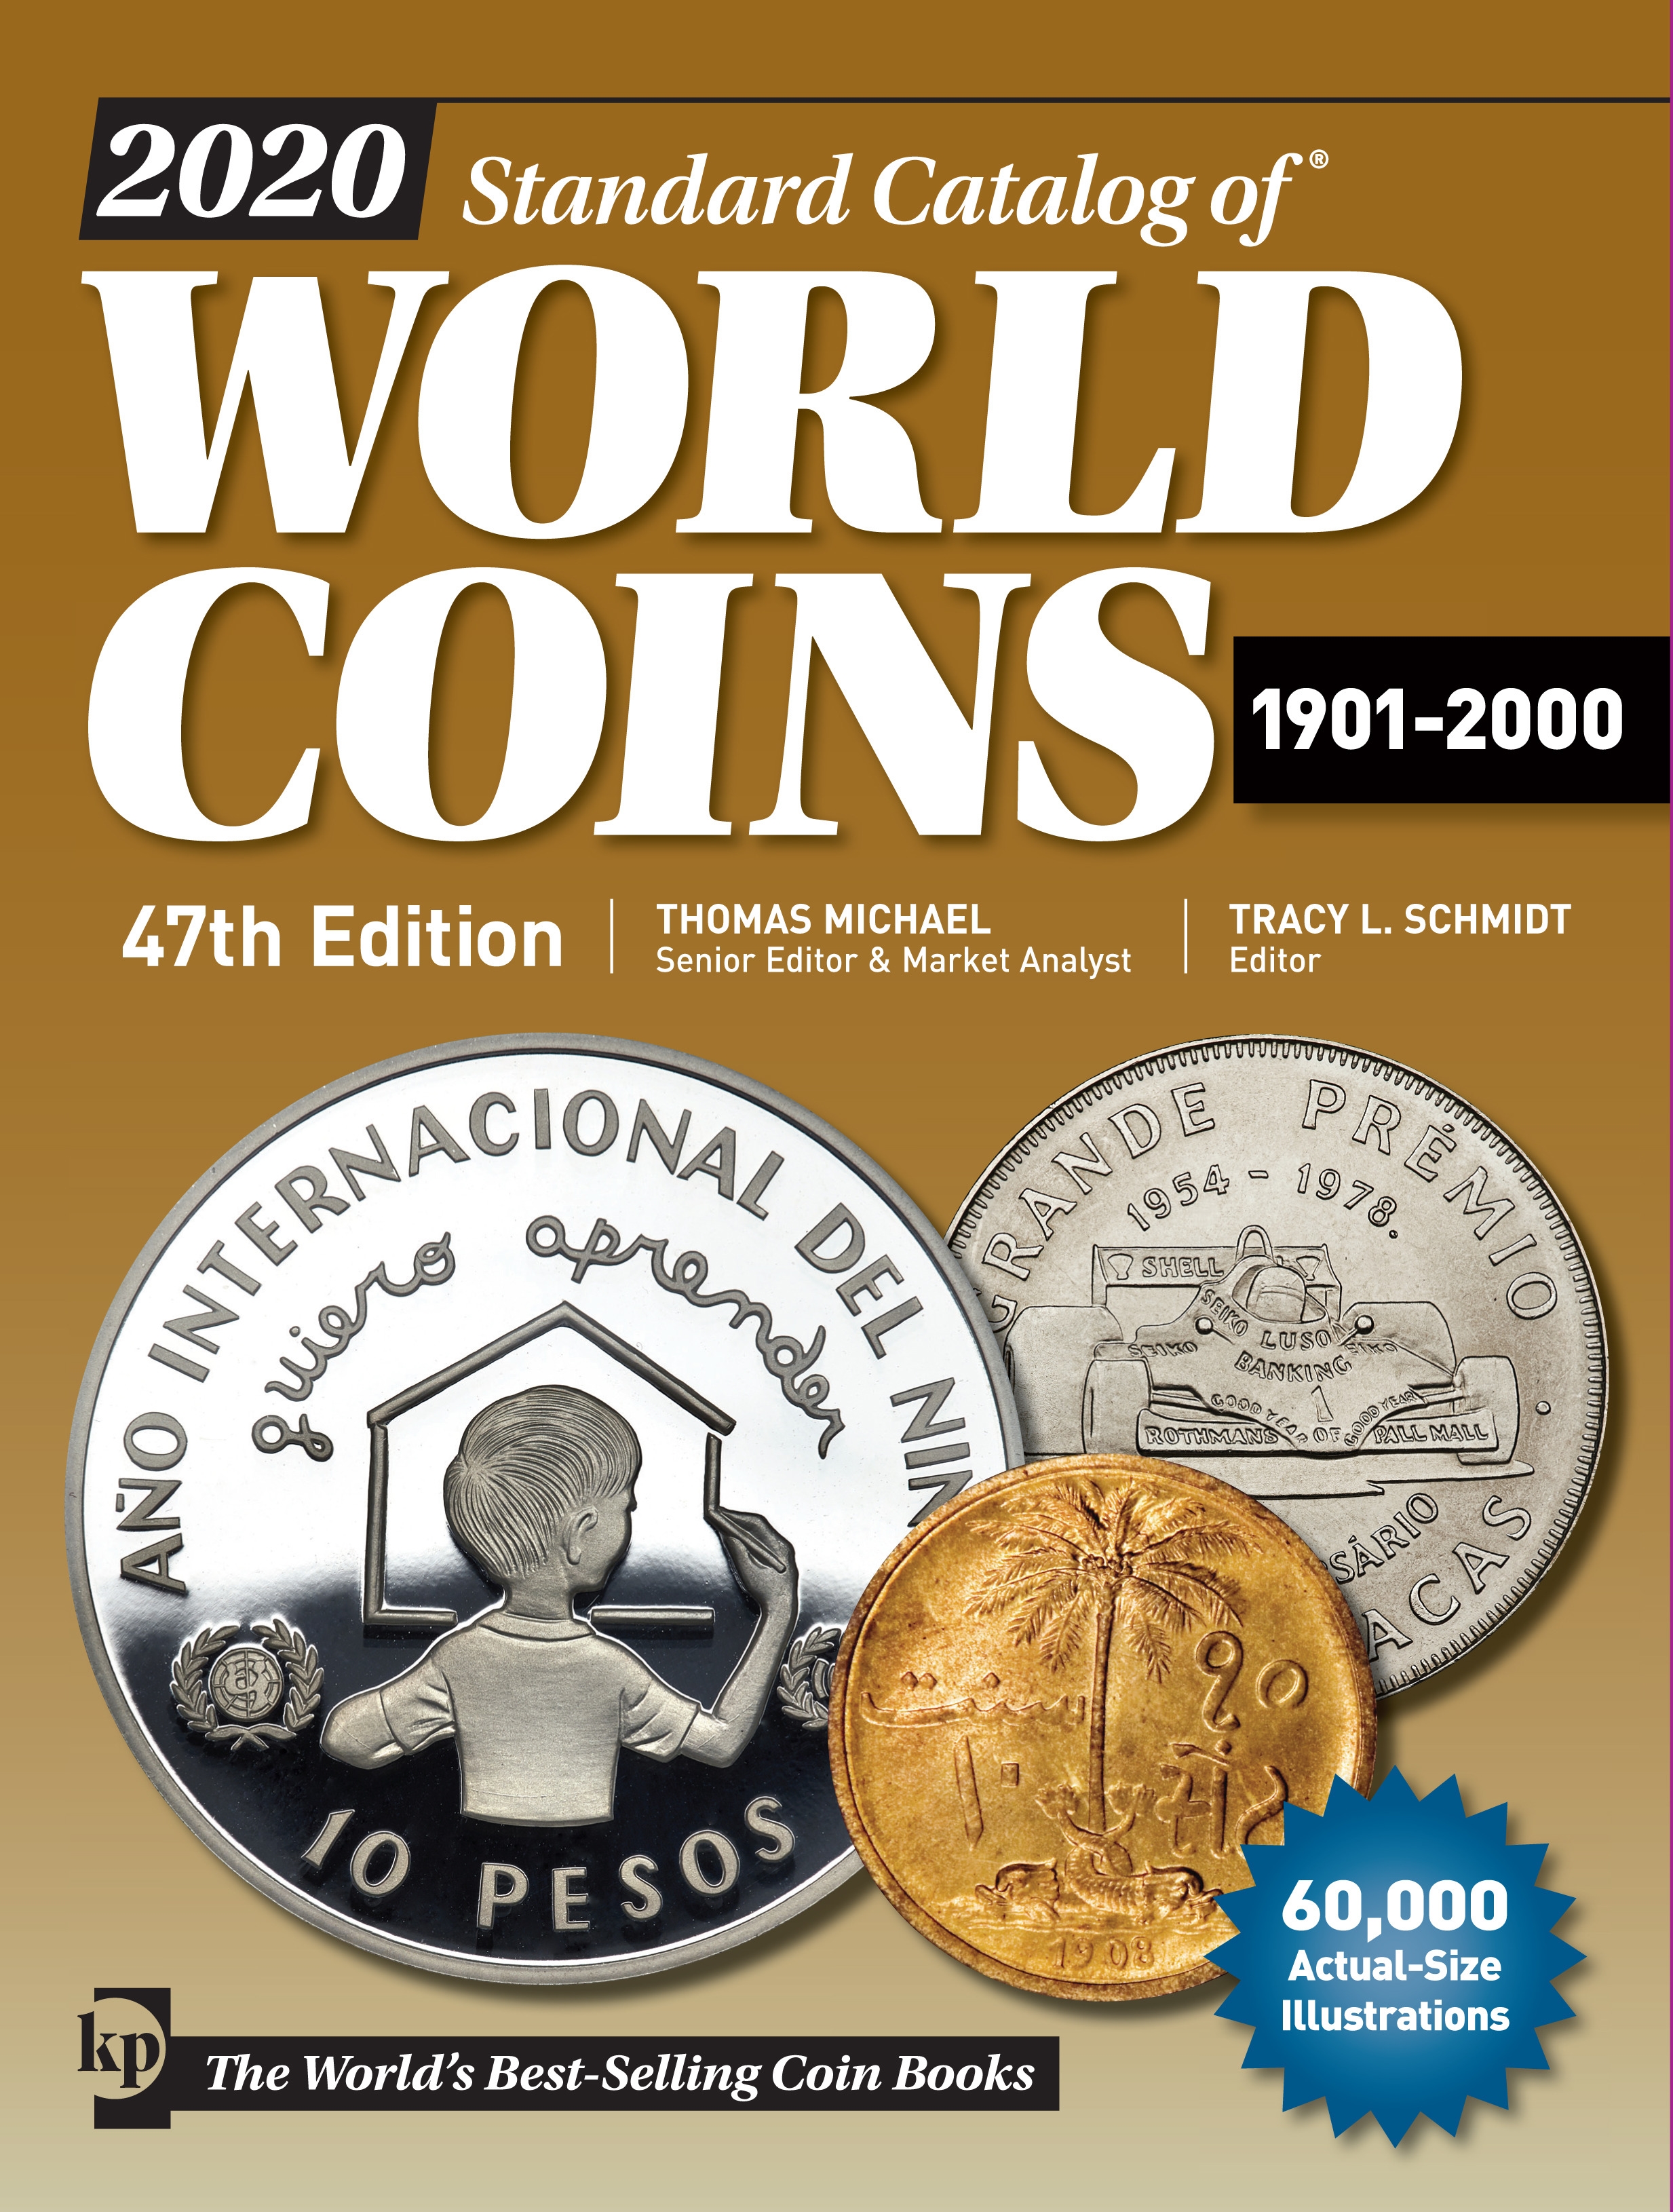 2020 Standard Catalog of World Coins 1901-2000 by Thomas Michael 